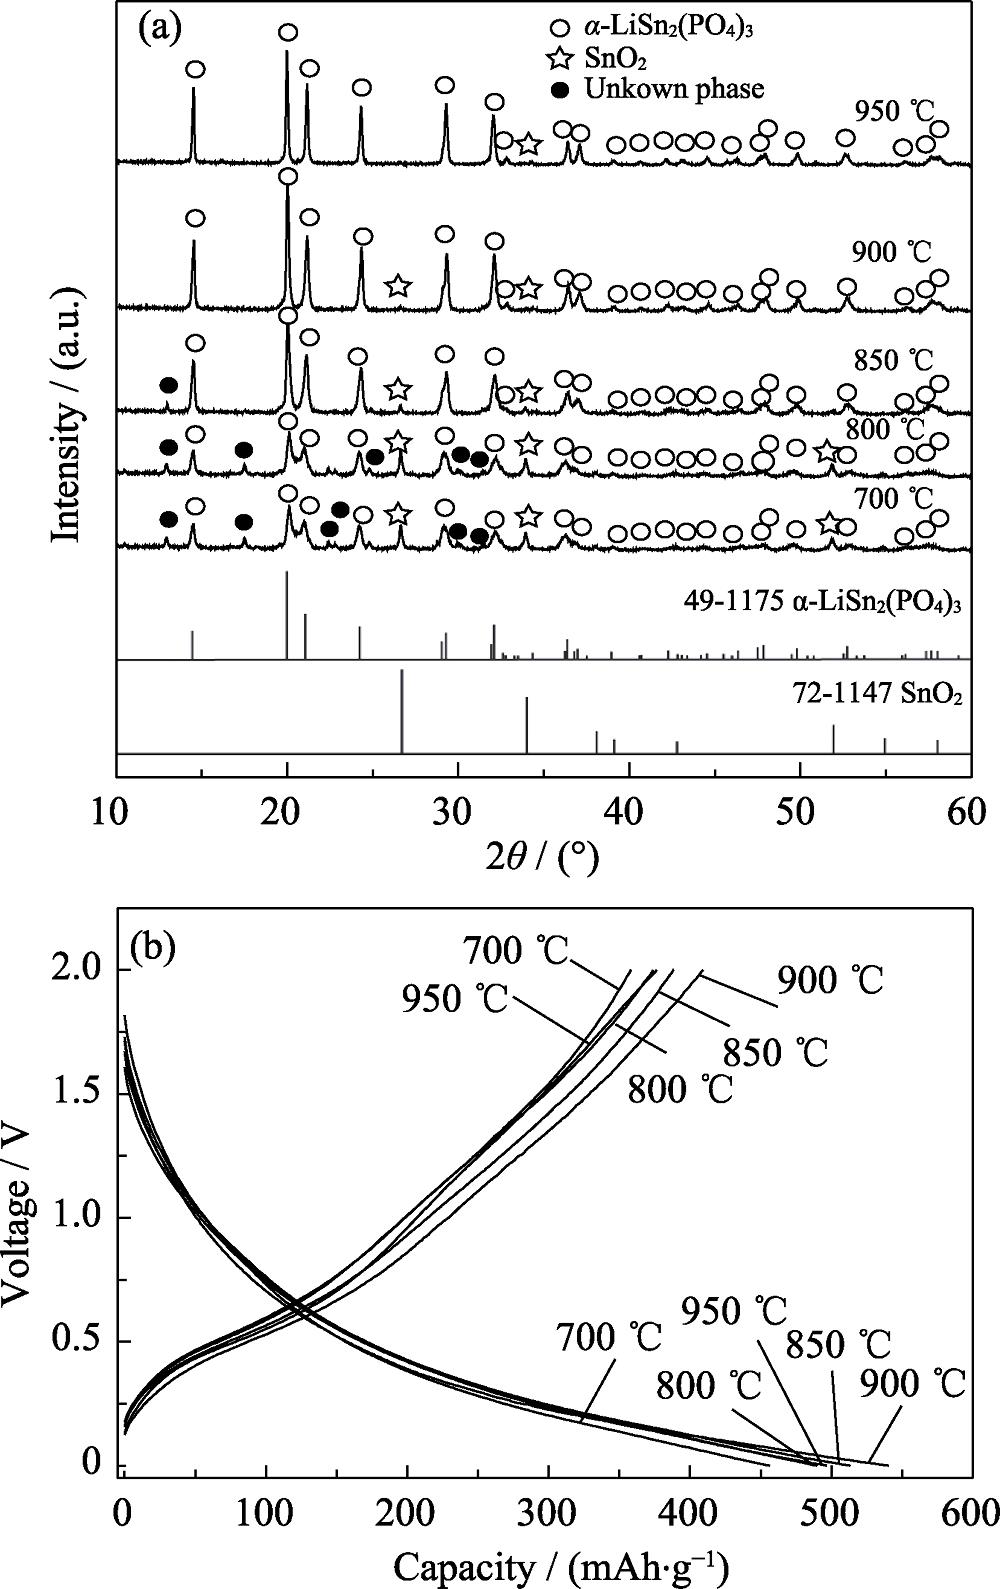 XRD patterns (a) and the second charge-discharge curves at 100 mA/g (b) of the products heat-treated at various temperatures with Cr3+ content of 0.4